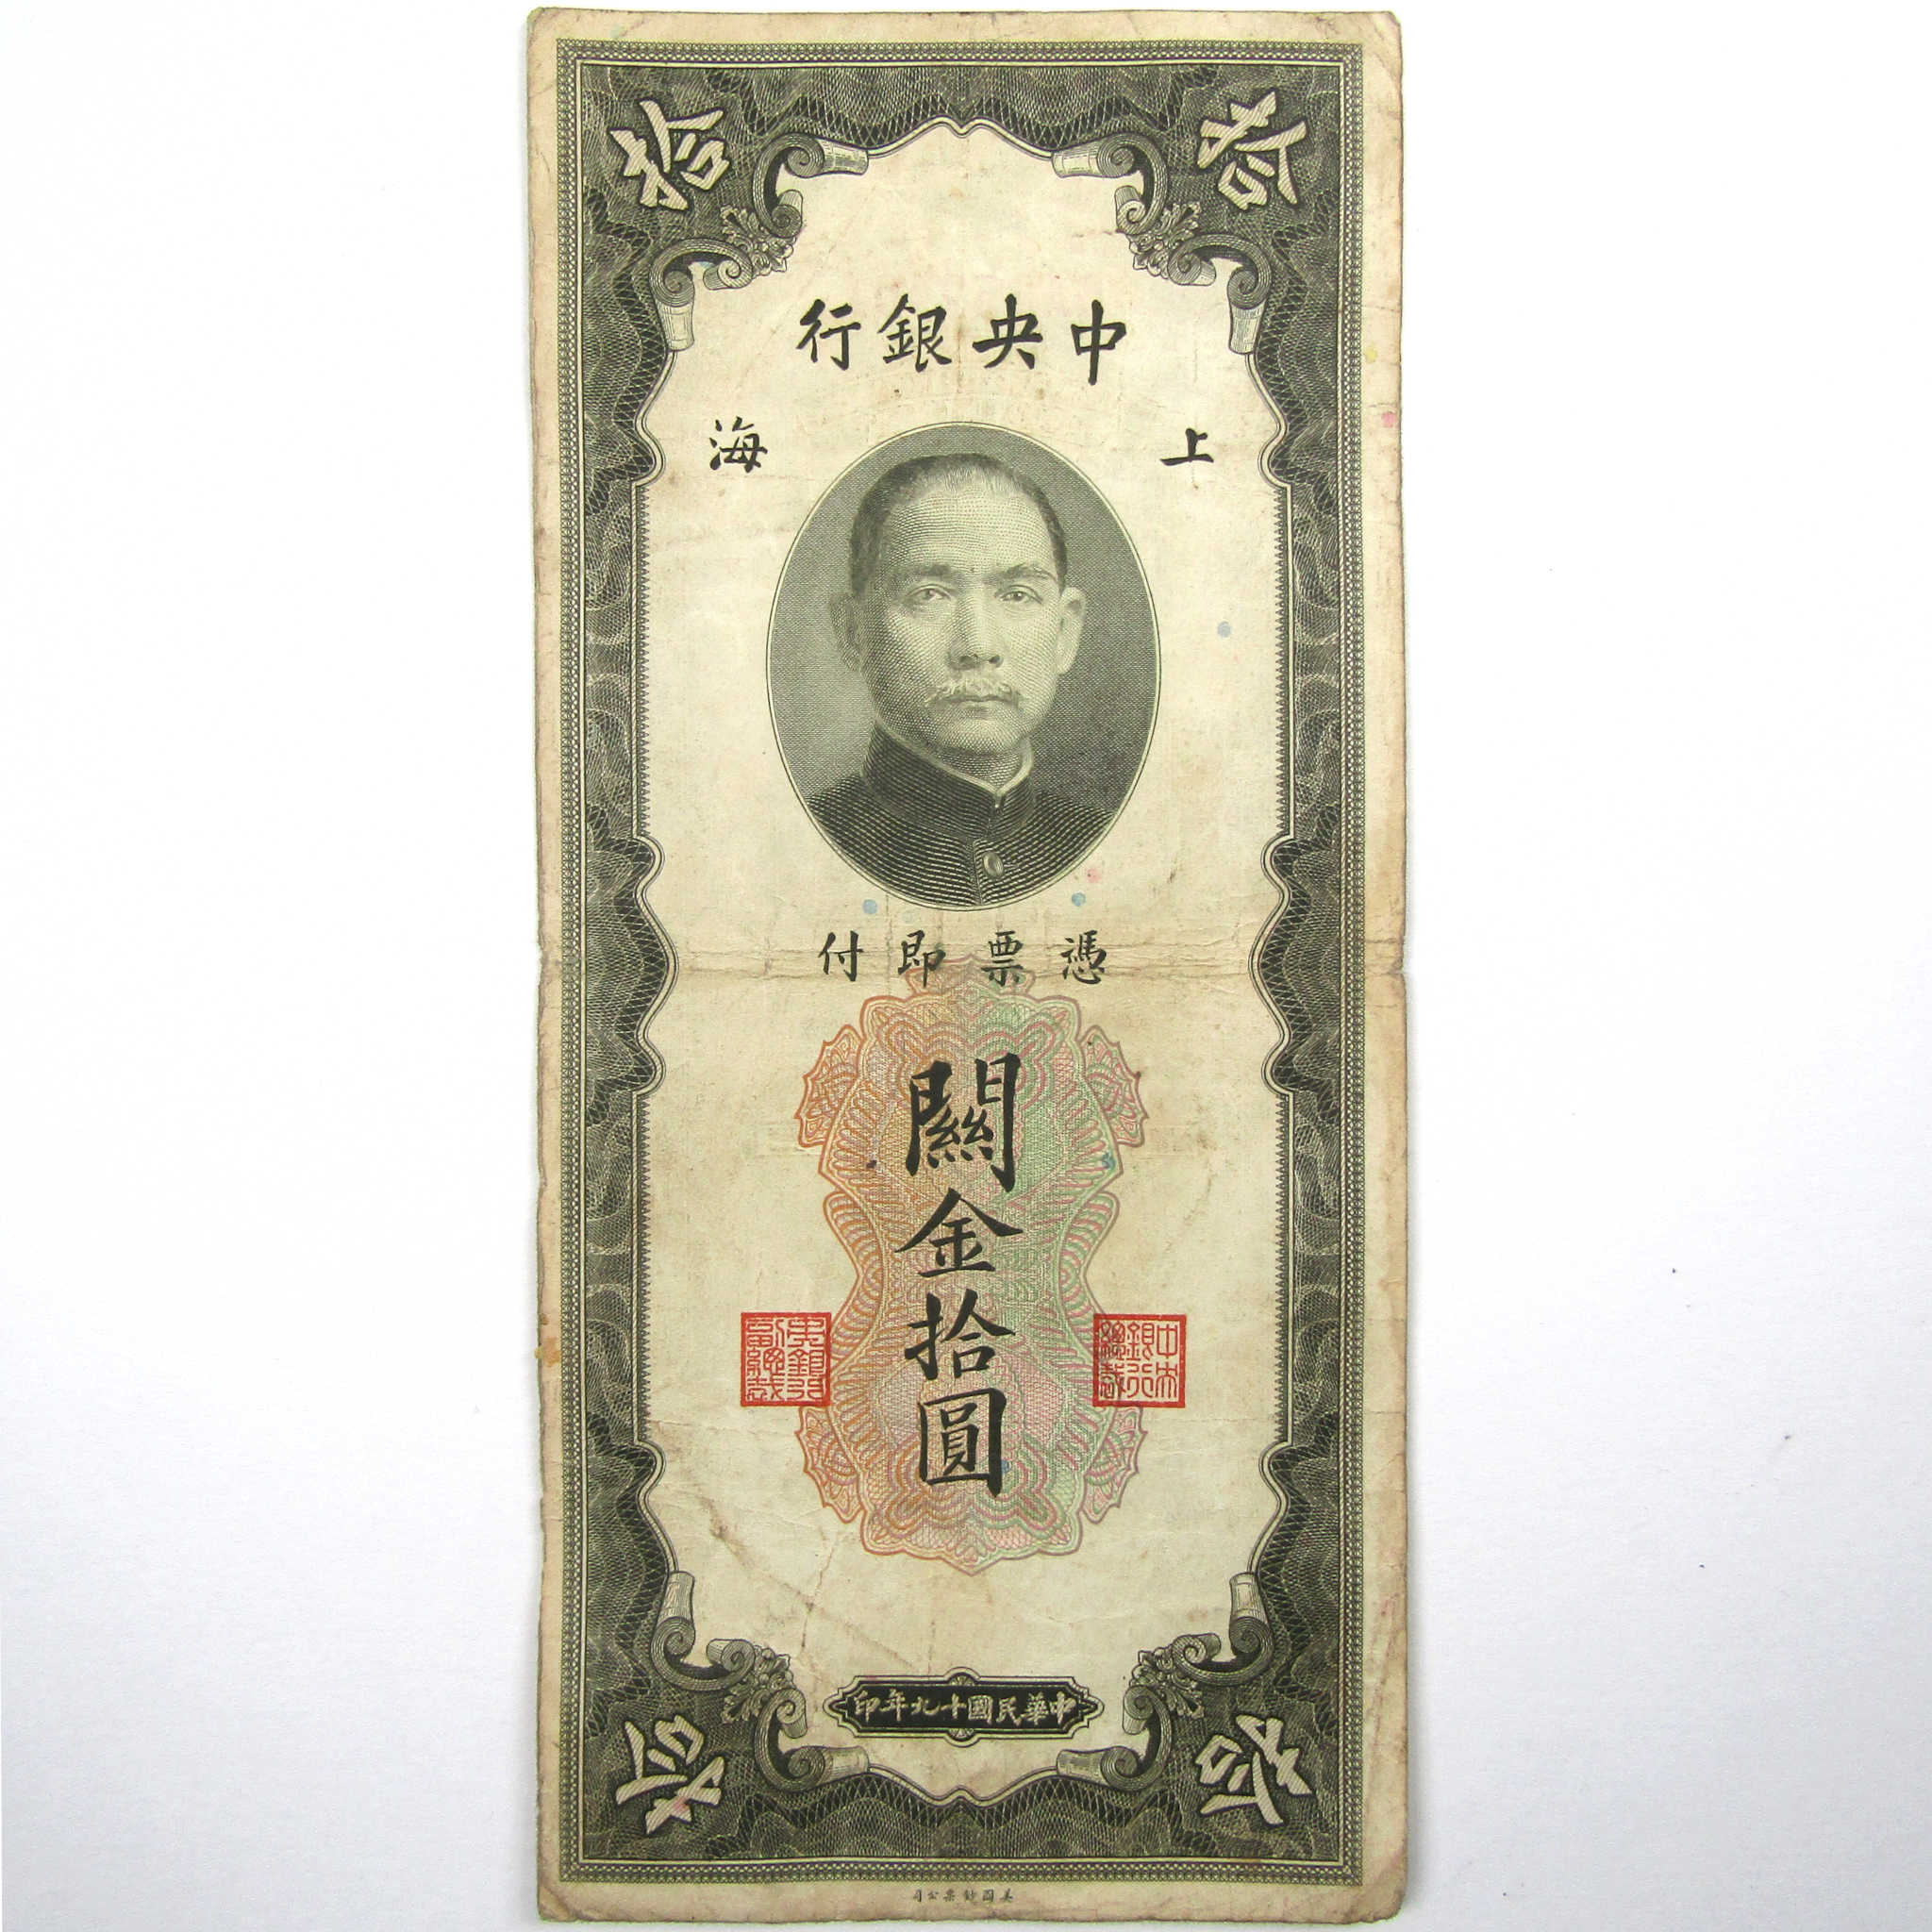 1930 China 10 Customs Gold Unit Bank Note Currency Collectible